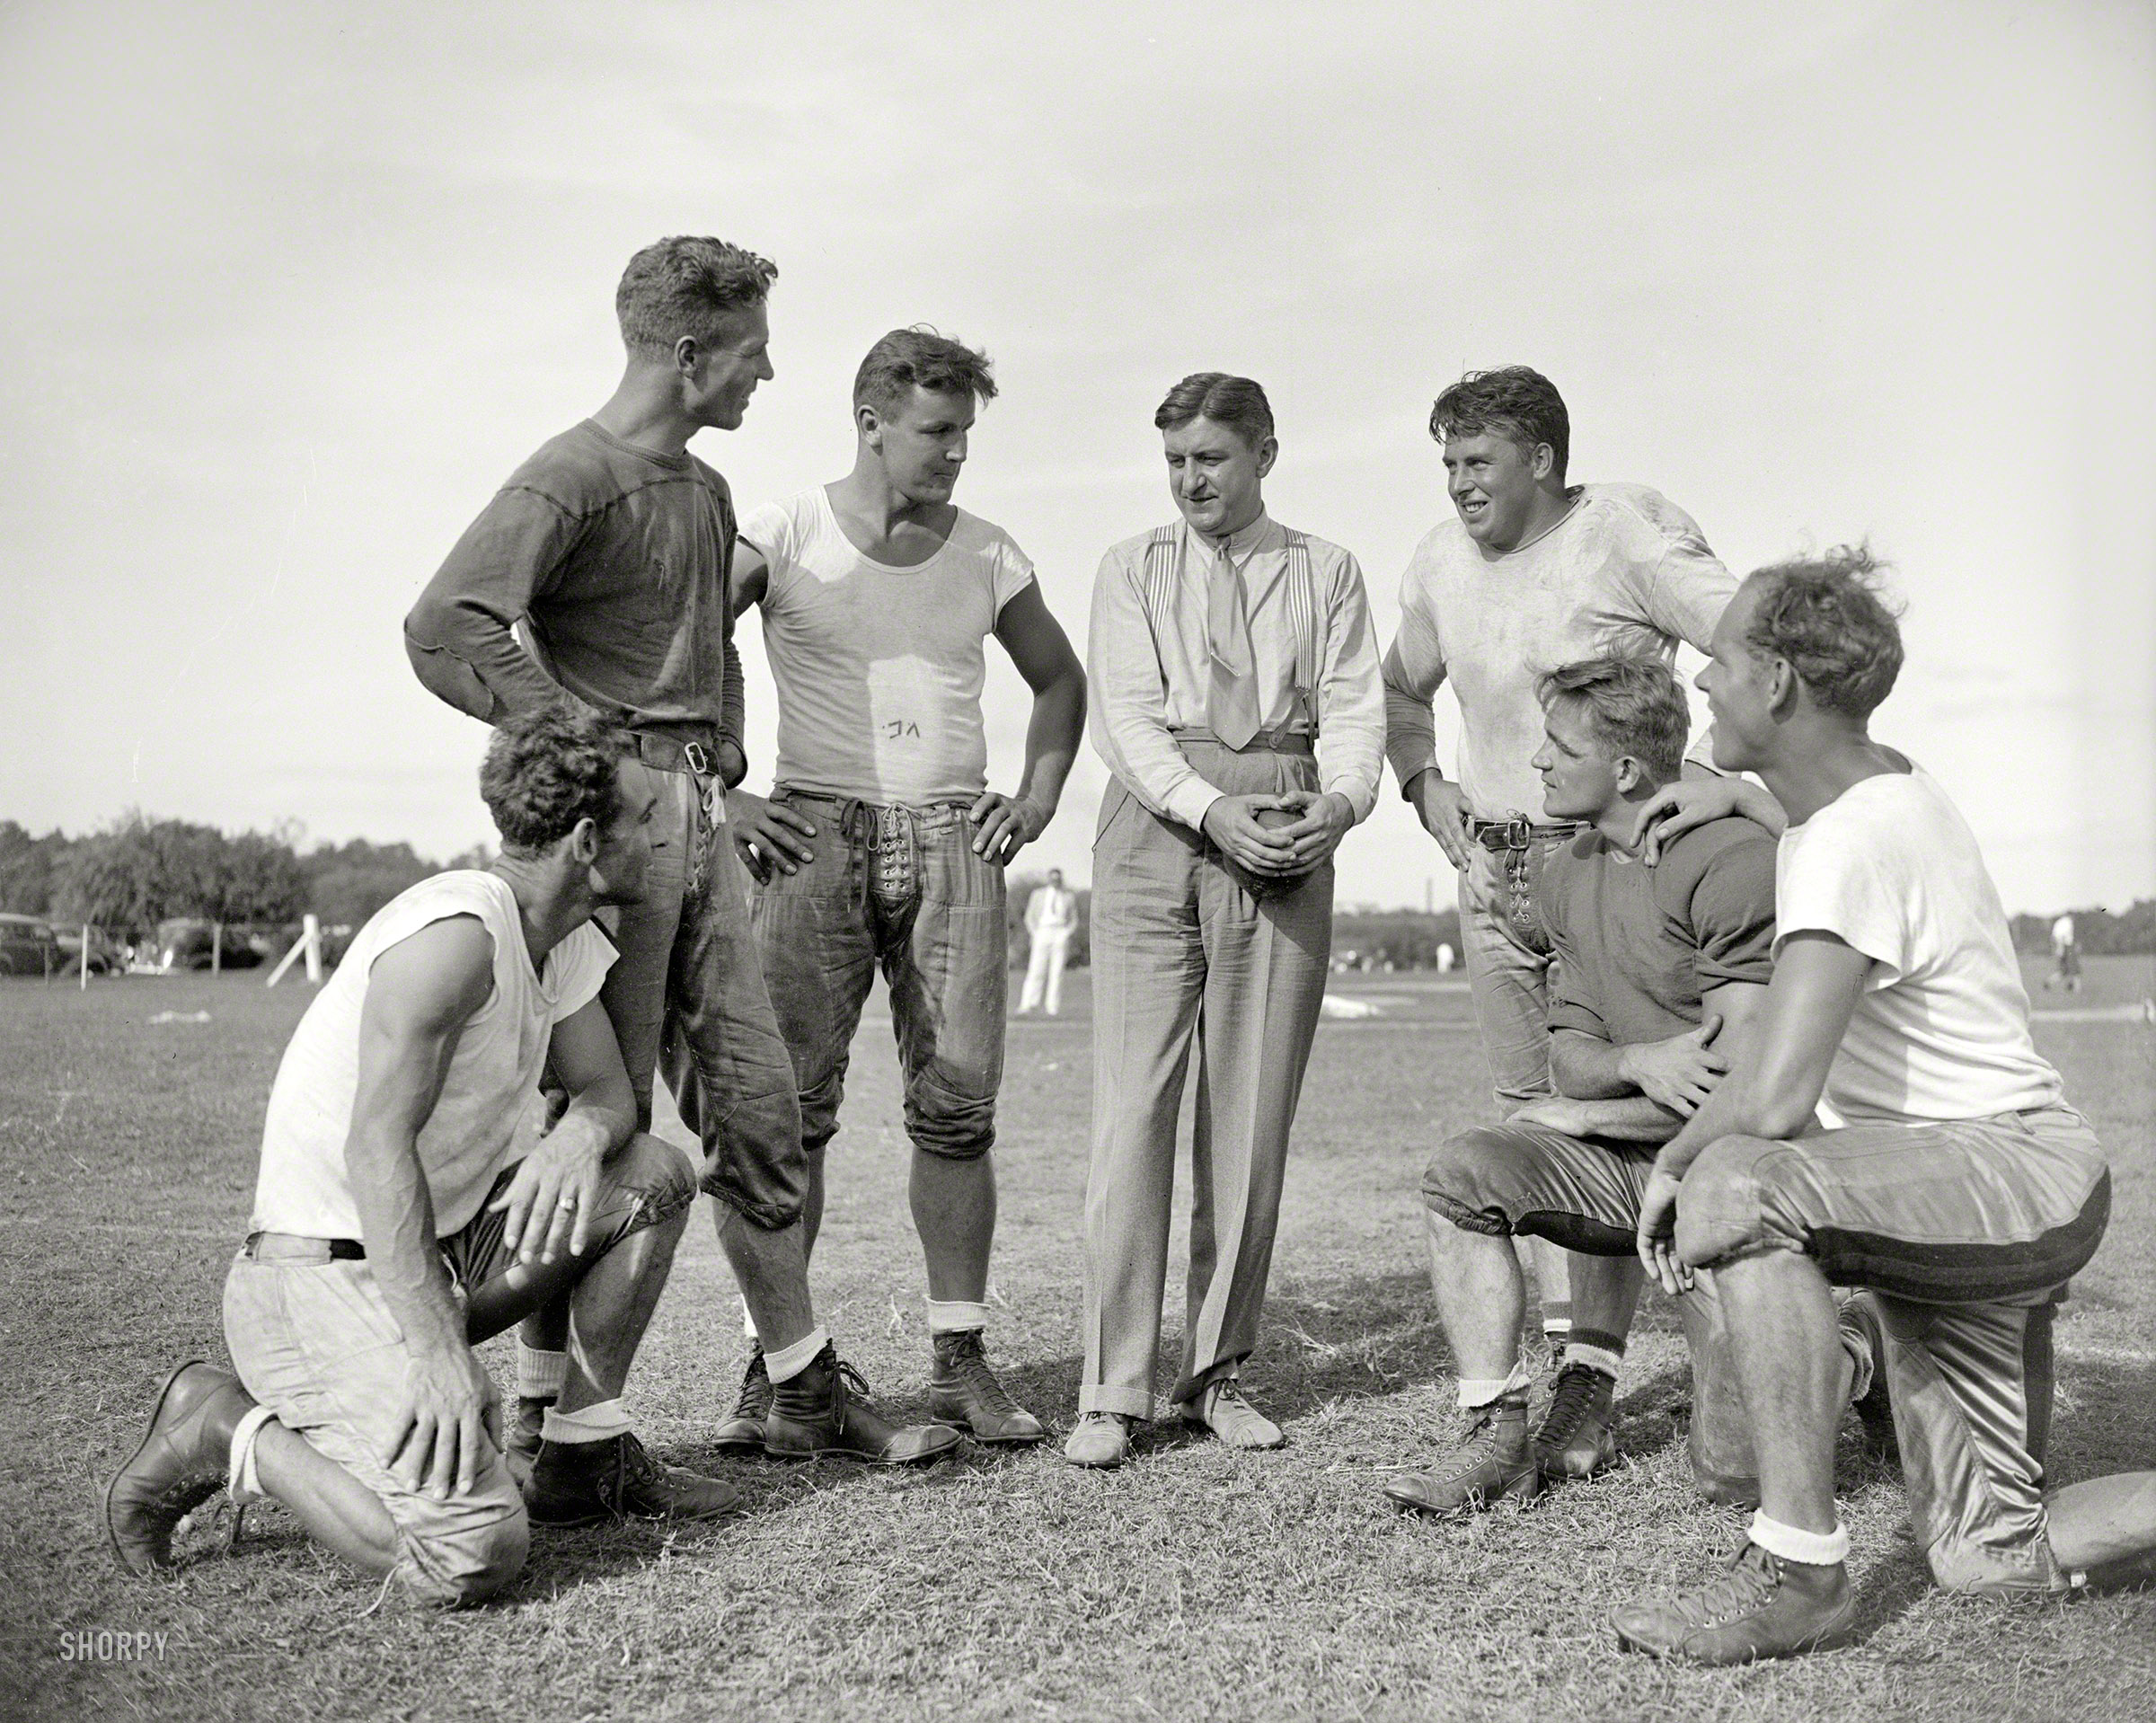 Sept. 11, 1937. Washington, D.C. "George Marshall, owner of the Washington Redskins, talks it over with some of his players, left to right: Wayne Millner, tackle, end; Charlie Malone, end; Vic Carroll, tackle; George Marshall and Bill Young, tackle; Ed Michaels, guard; Jim Garber, tackle." View full size.